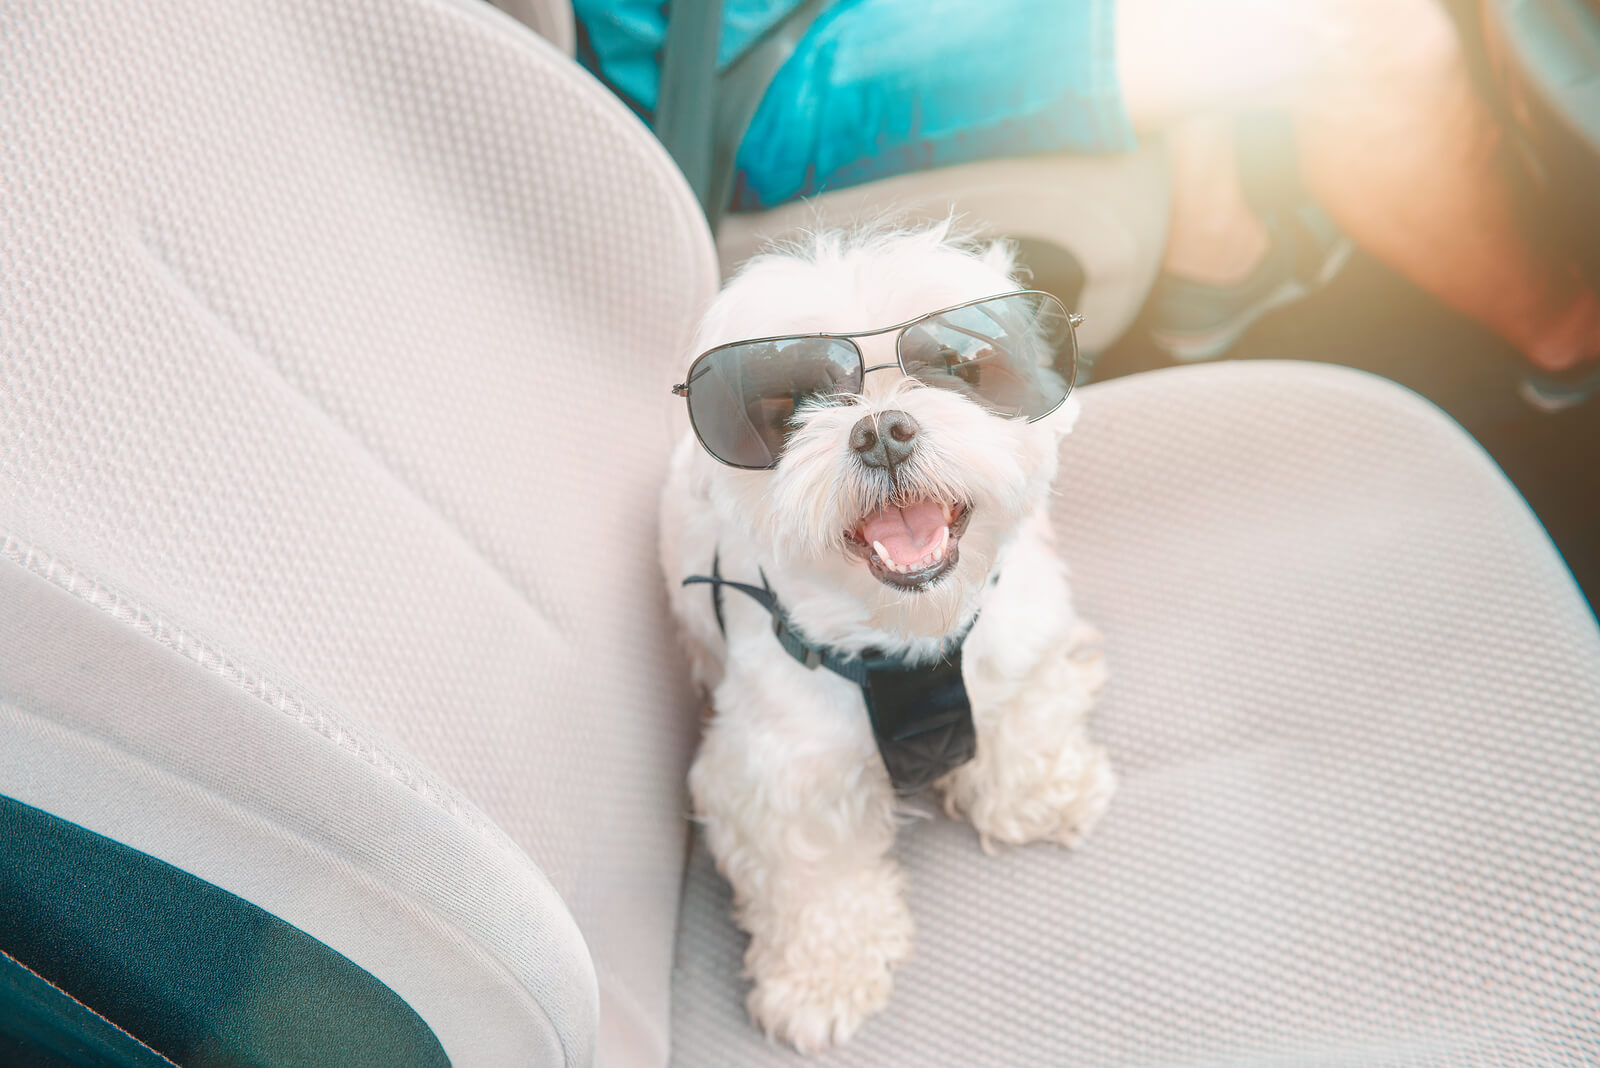 small dog wearing sunglasses in the car